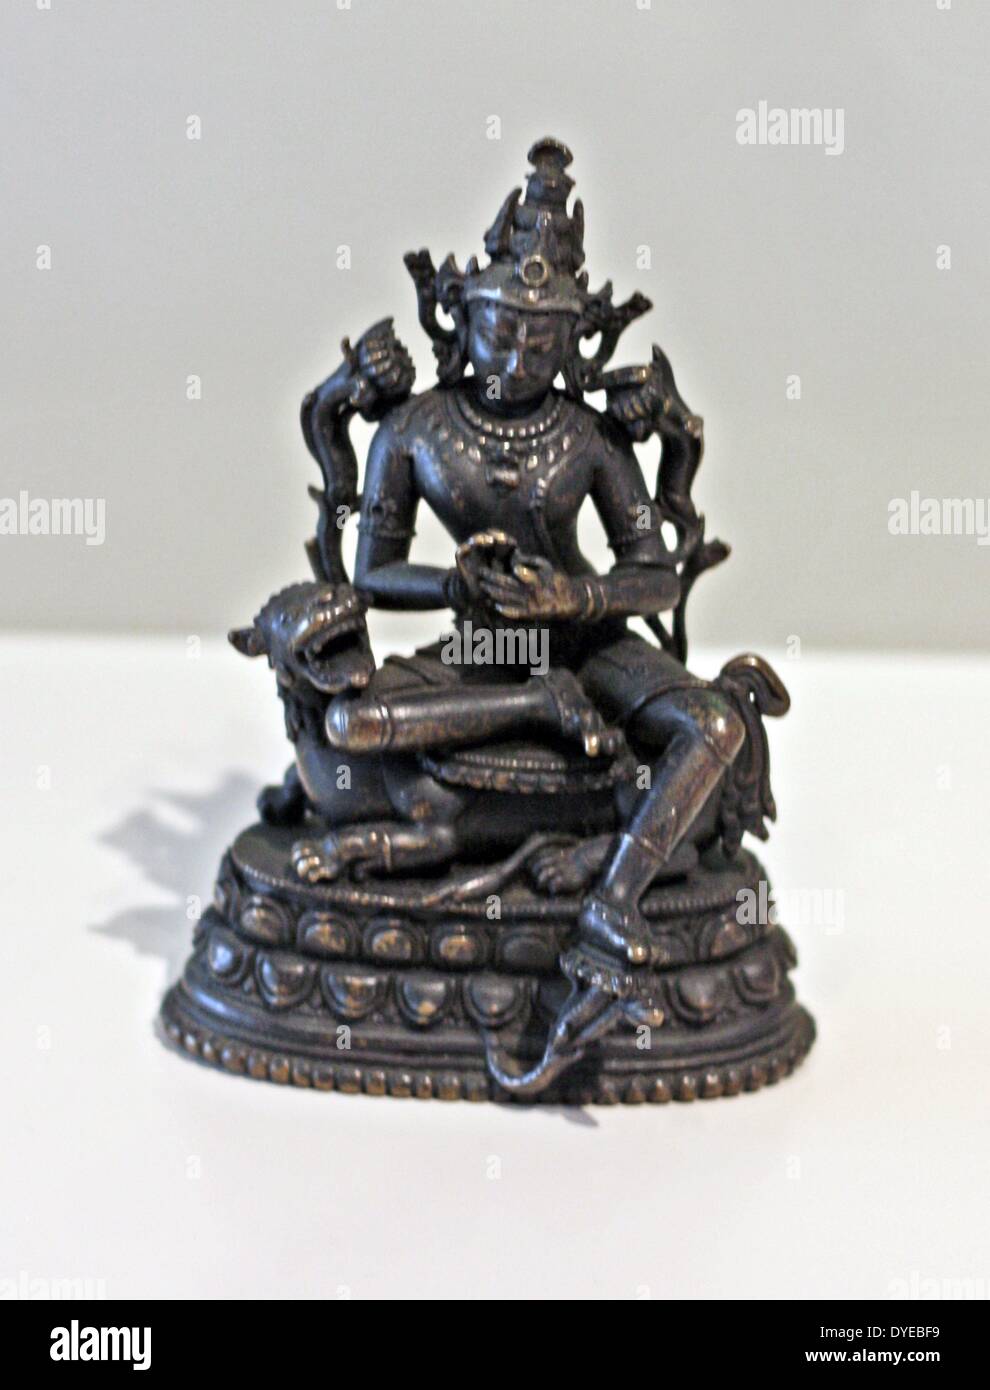 The bodhisattva Manjushri. India or Bangladesh, Bengal, 11th-12th century, bronze, silver. Manjushri is seated on his mount, a lion. His relaxed pose, with one leg hanging down, is called lolita-esuna and is often found in images of bodhisattvas. On the blue water lily to the right of Manjushri's head is his attribute - the book, a symbol of wisdom. Manjushri is making the gesture to set the wheel of doctrine in motion. Stock Photo